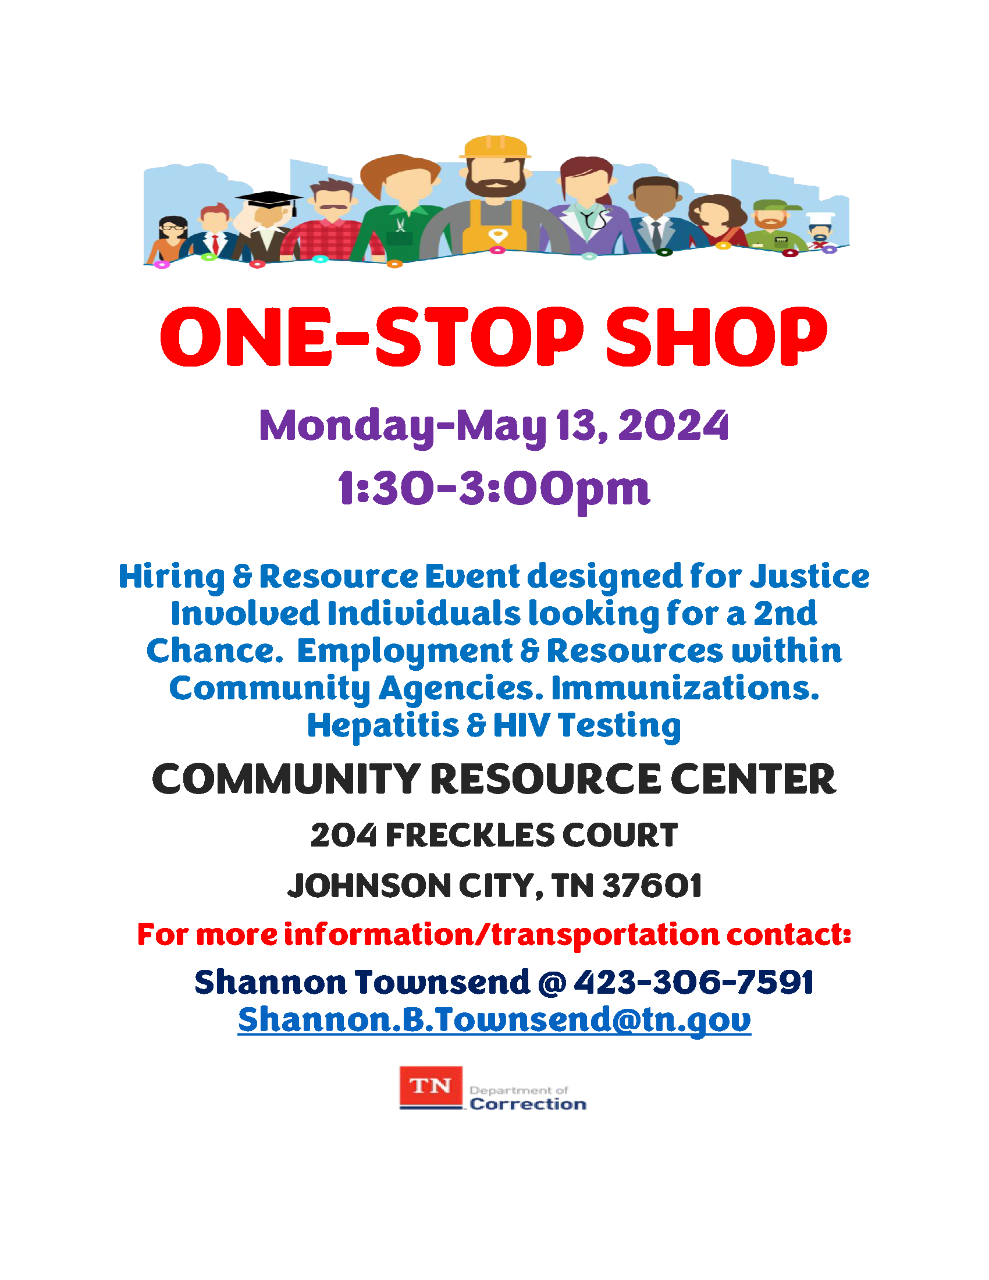 Hiring Event for Justice-Involved Individuals in Johnson City is May 13